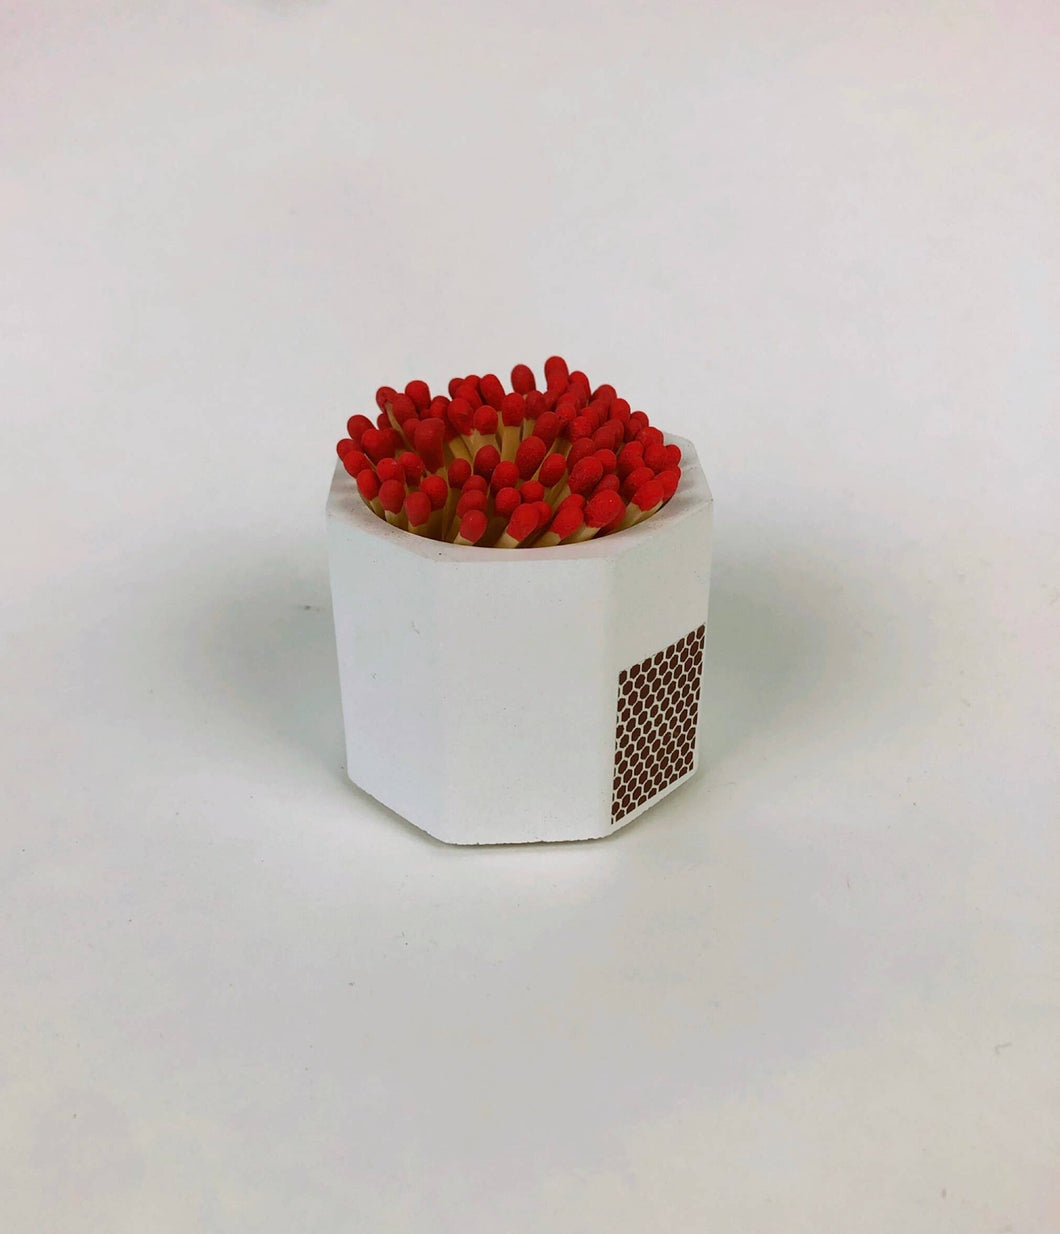 White Match Holder w/ Striker and Red Matches